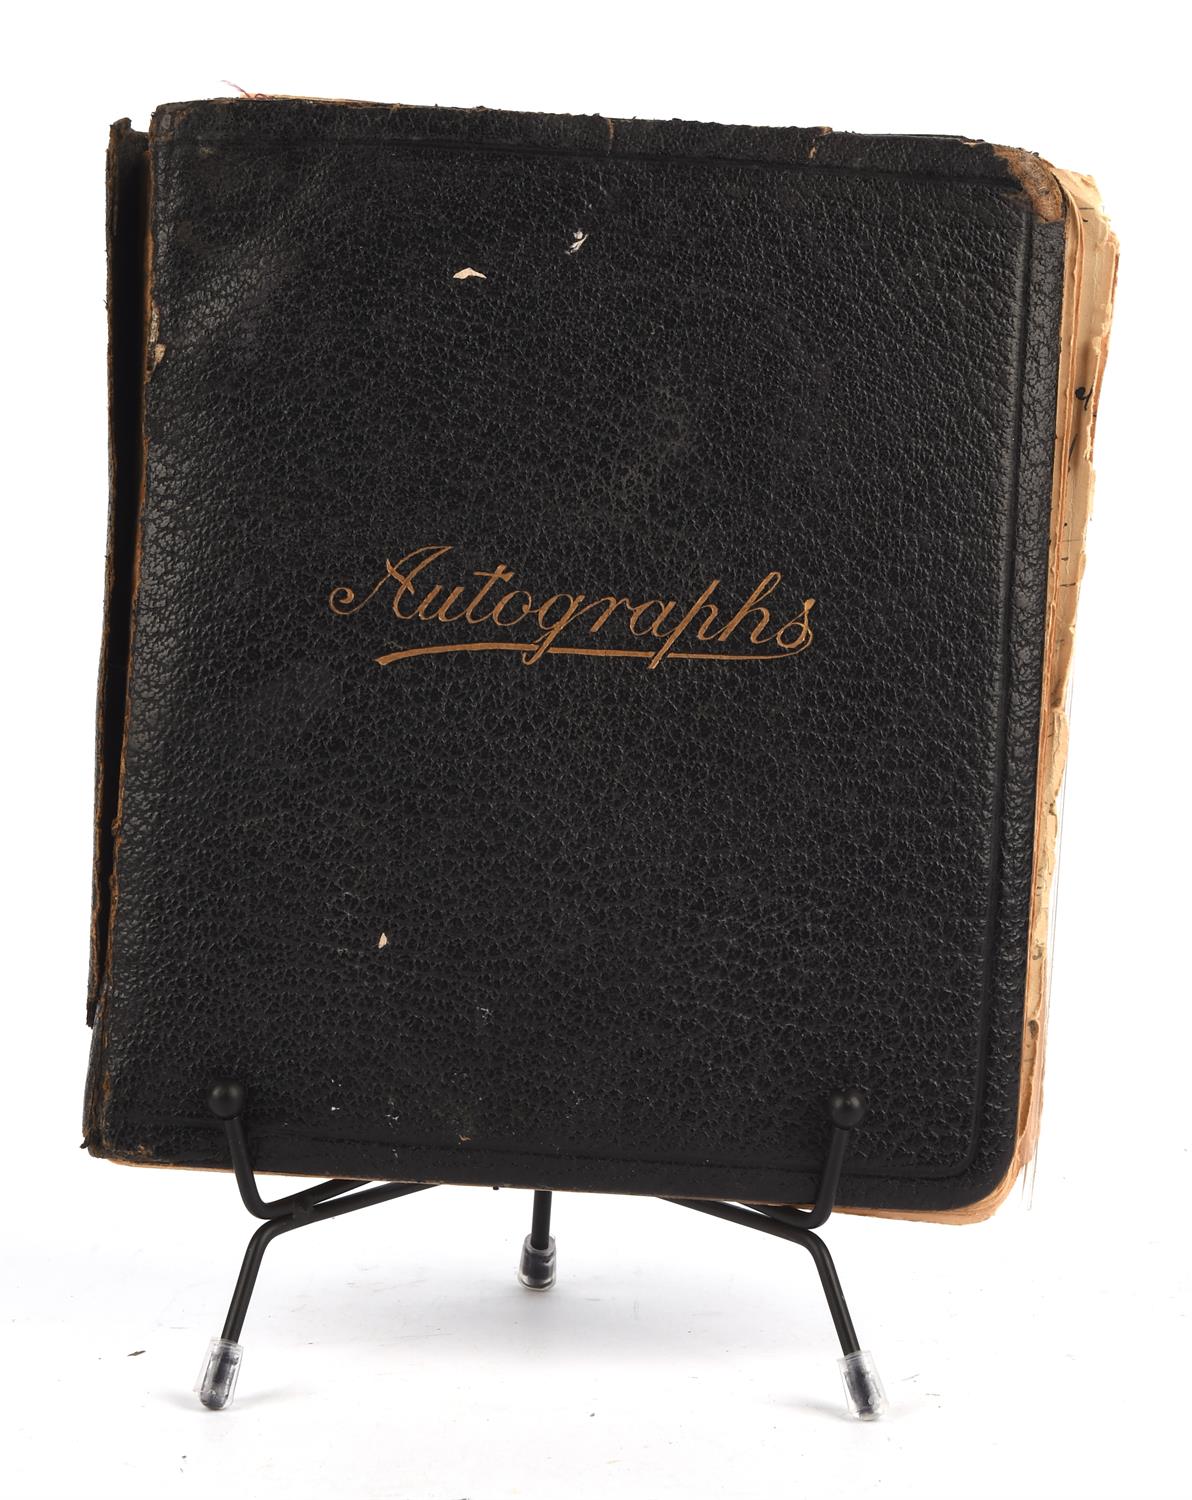 Autograph Album/Visitors Book, 1913-2005 – a bound album with Autographs in gilt to front cover, - Image 2 of 2